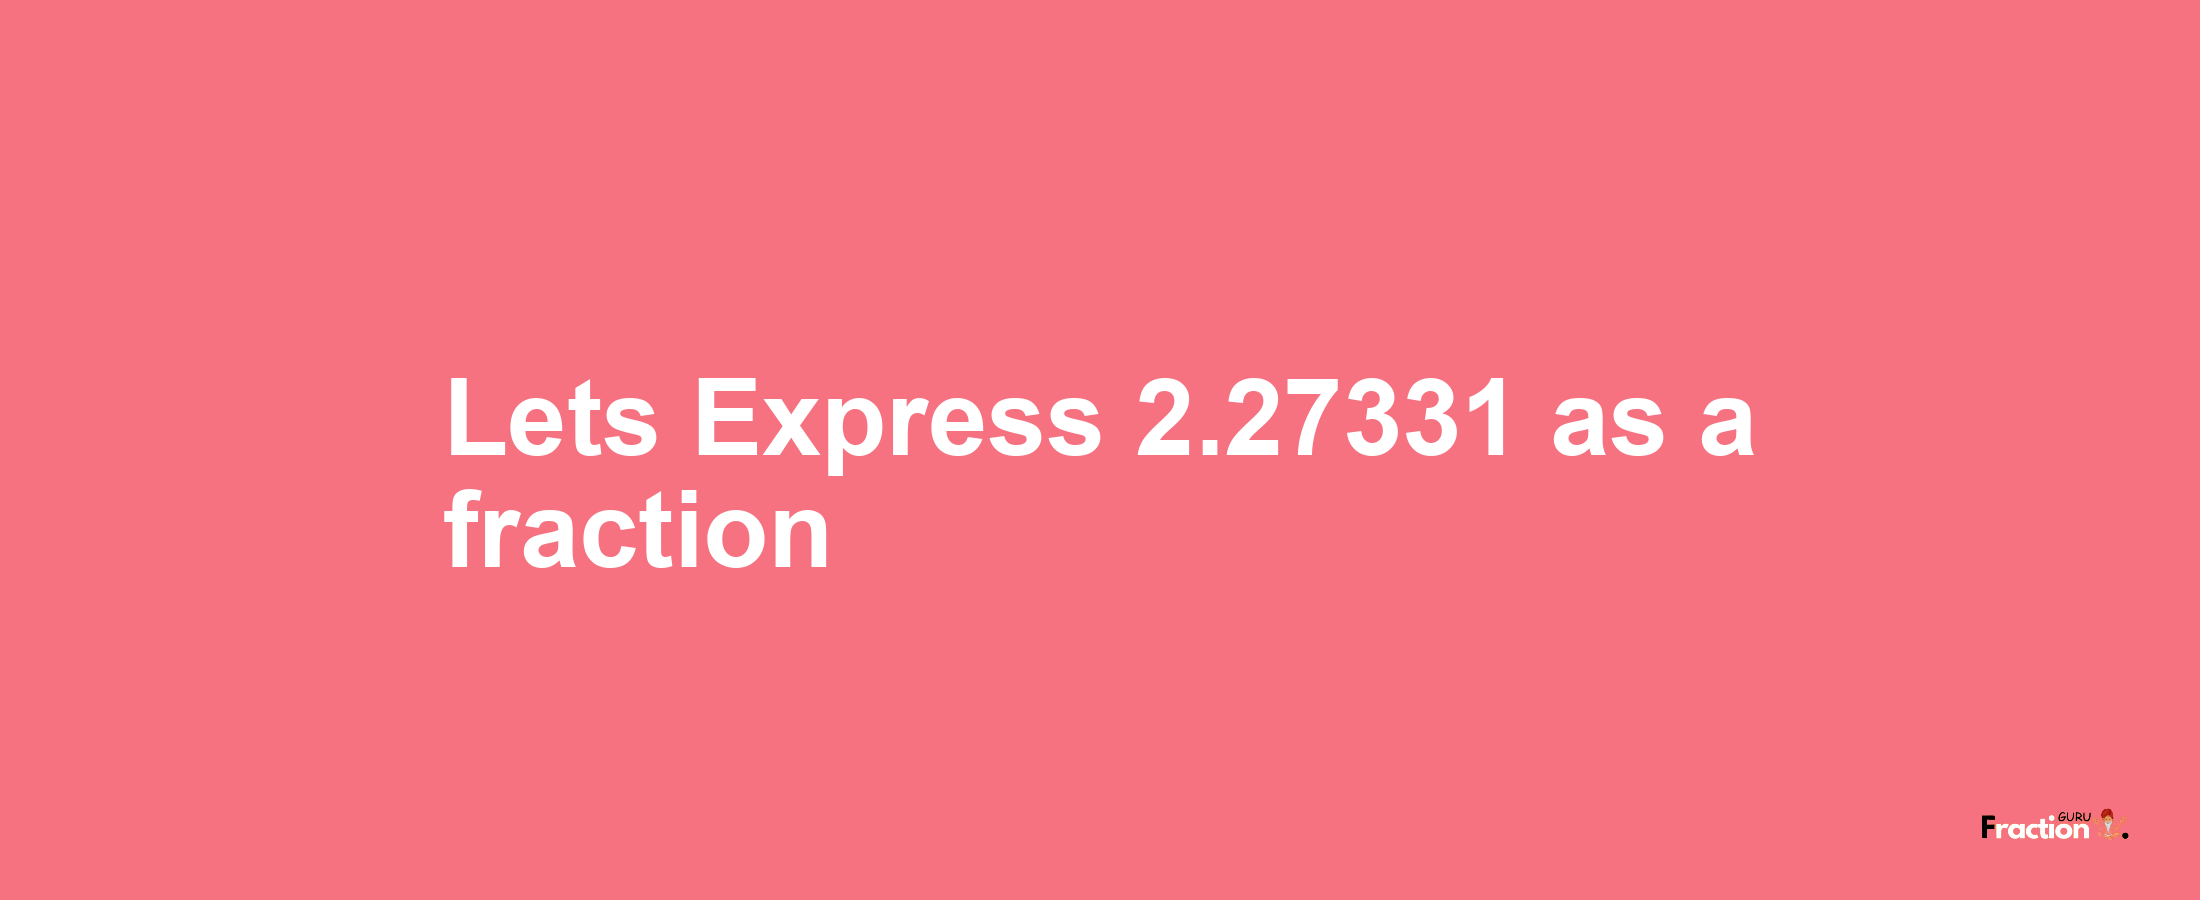 Lets Express 2.27331 as afraction